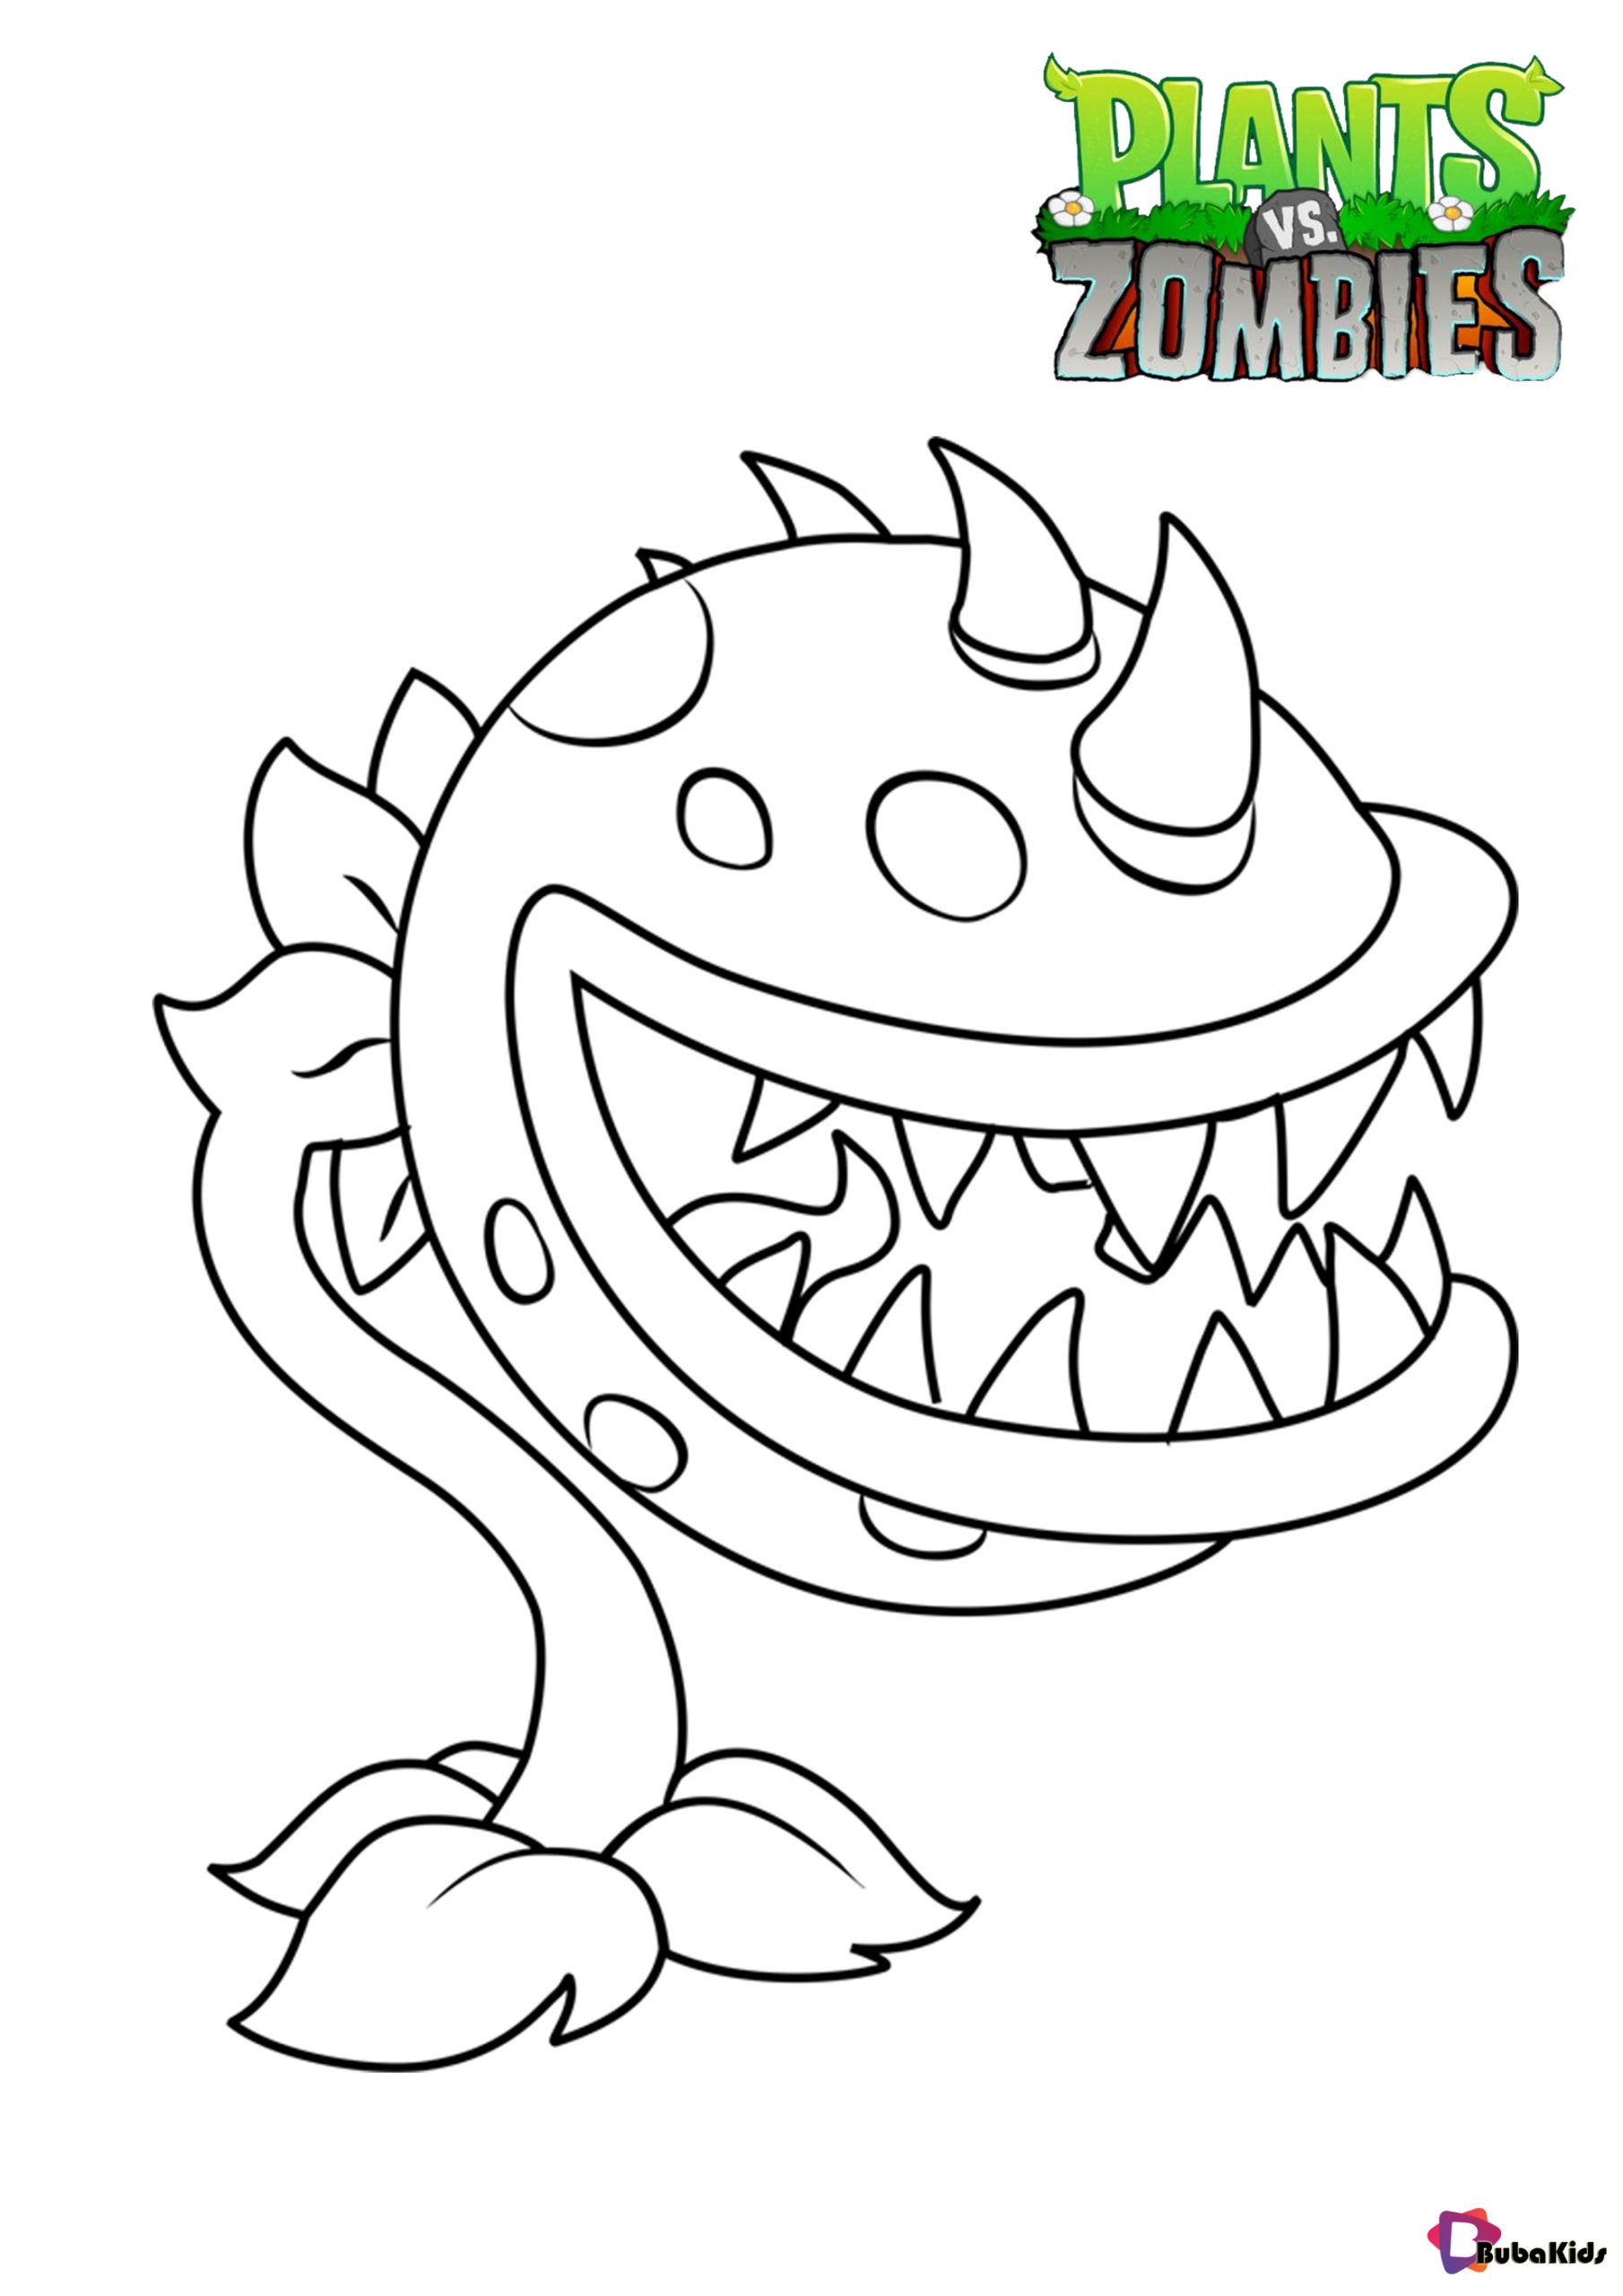 Plants vs Zombies Chomper coloring pages